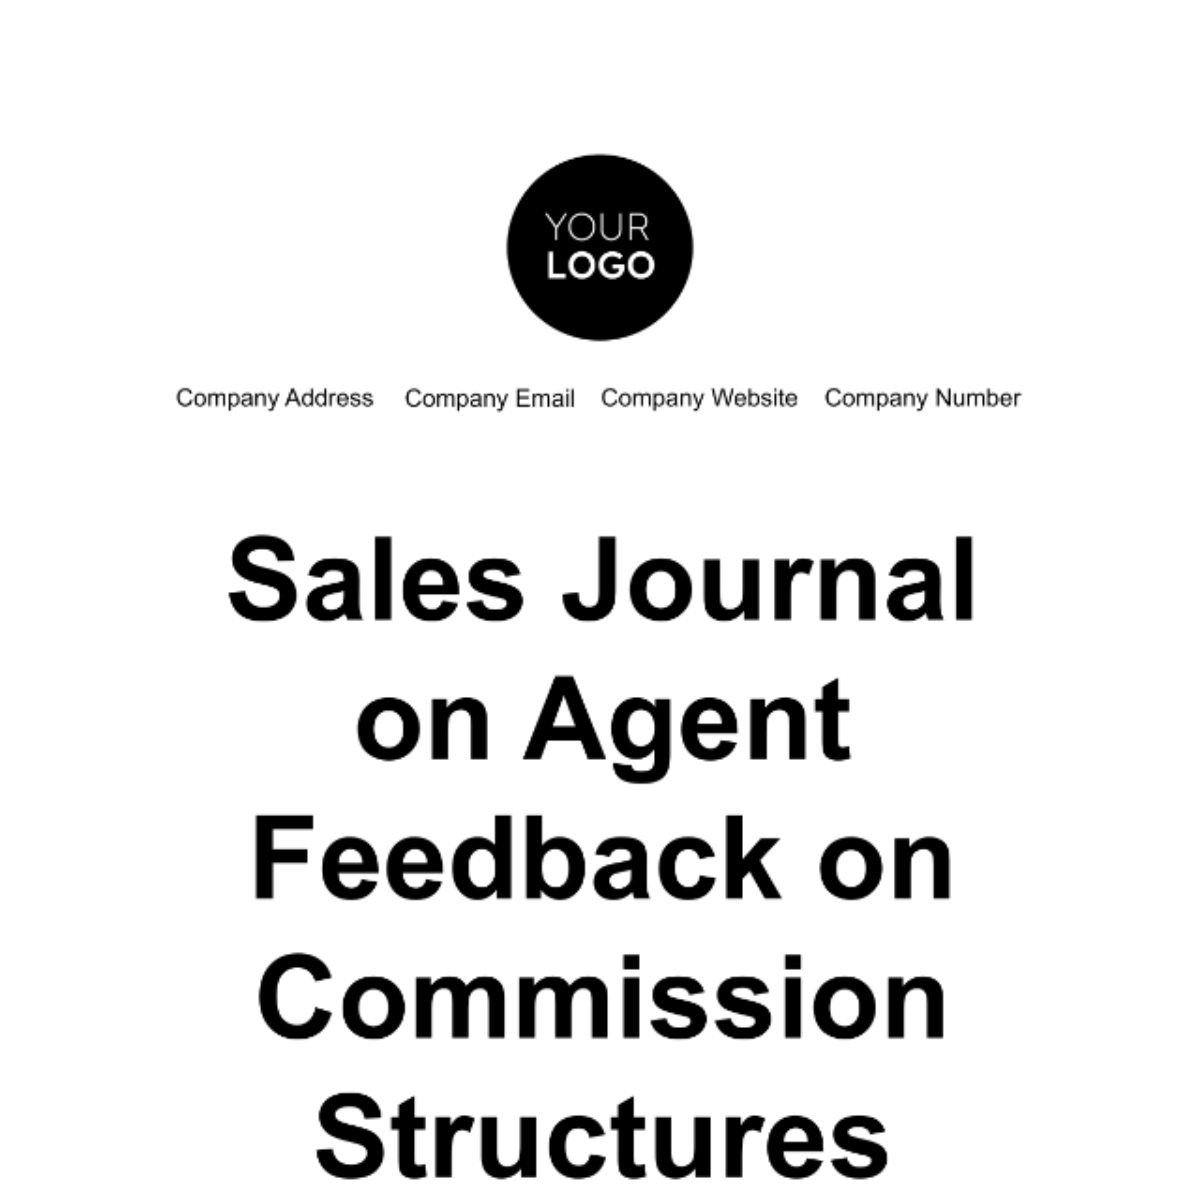 Sales Journal on Agent Feedback on Commission Structures Template